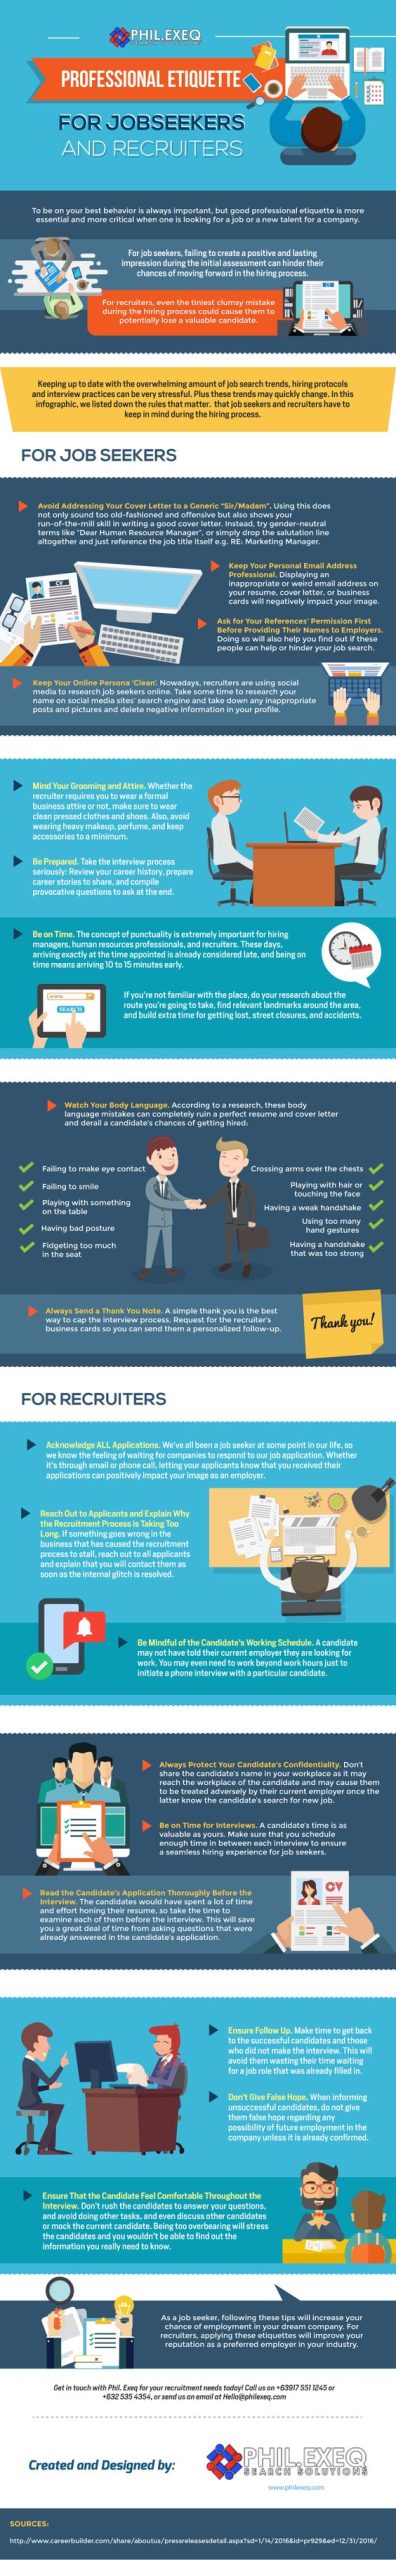 Professional Etiquette for Jobseekers and Recruiters (Infographic)